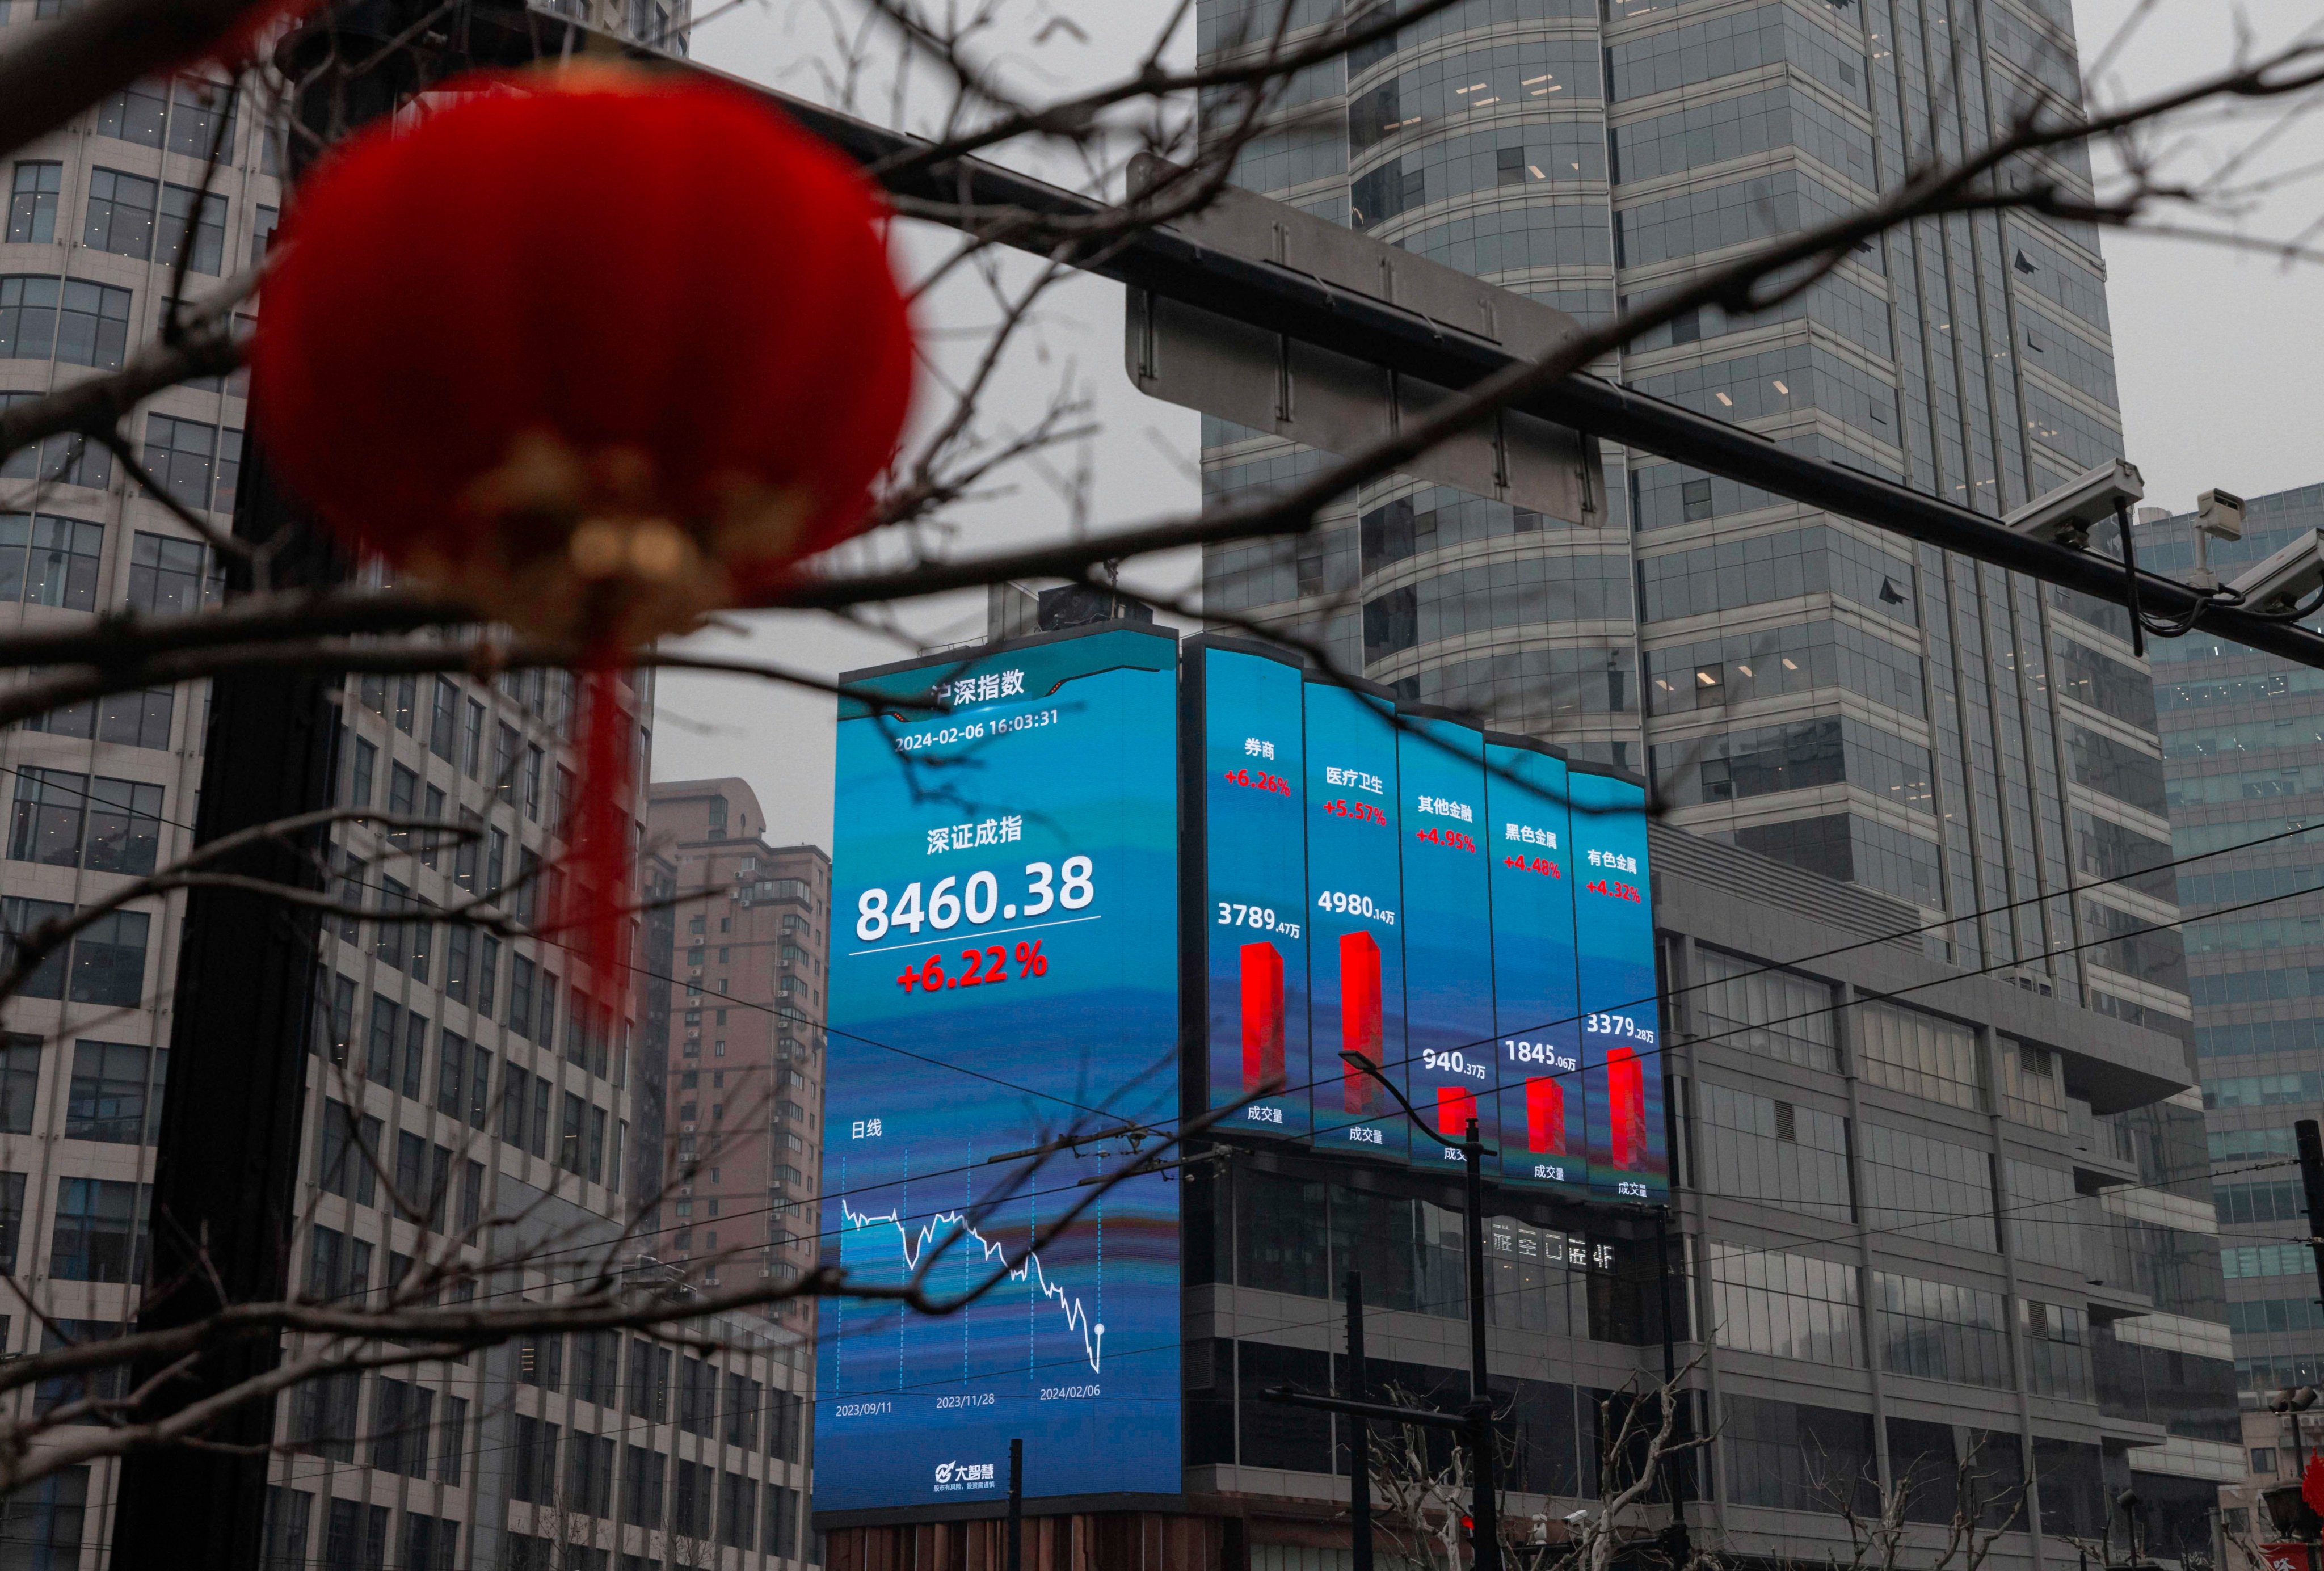 A large screen shows the latest stock exchange and economy data in Shanghai. Photo: EPA-EFE